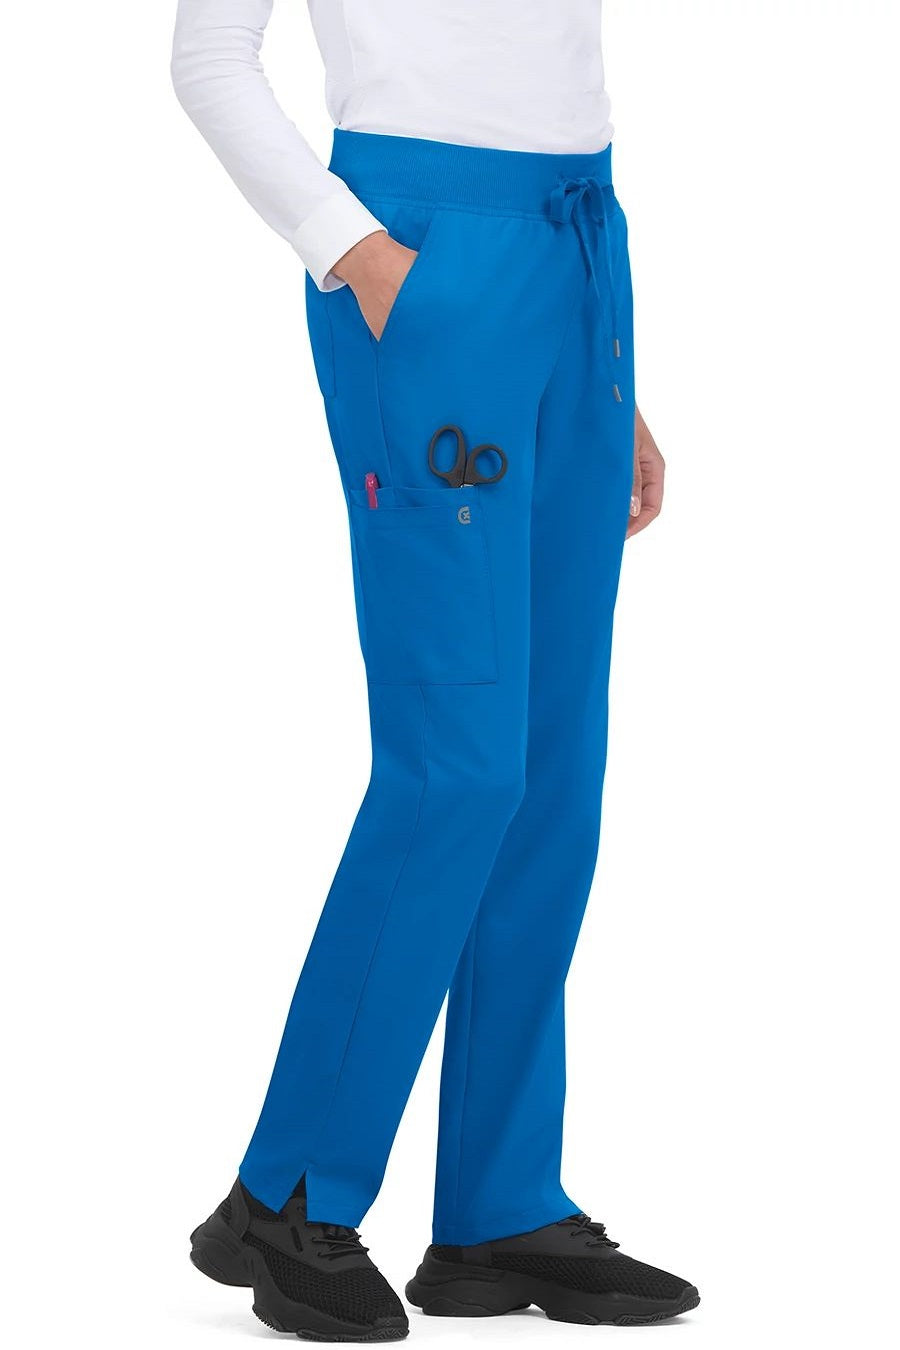 koi Scrub Pants Cureology Atria in Royal at Parker's Clothing and Shoes.